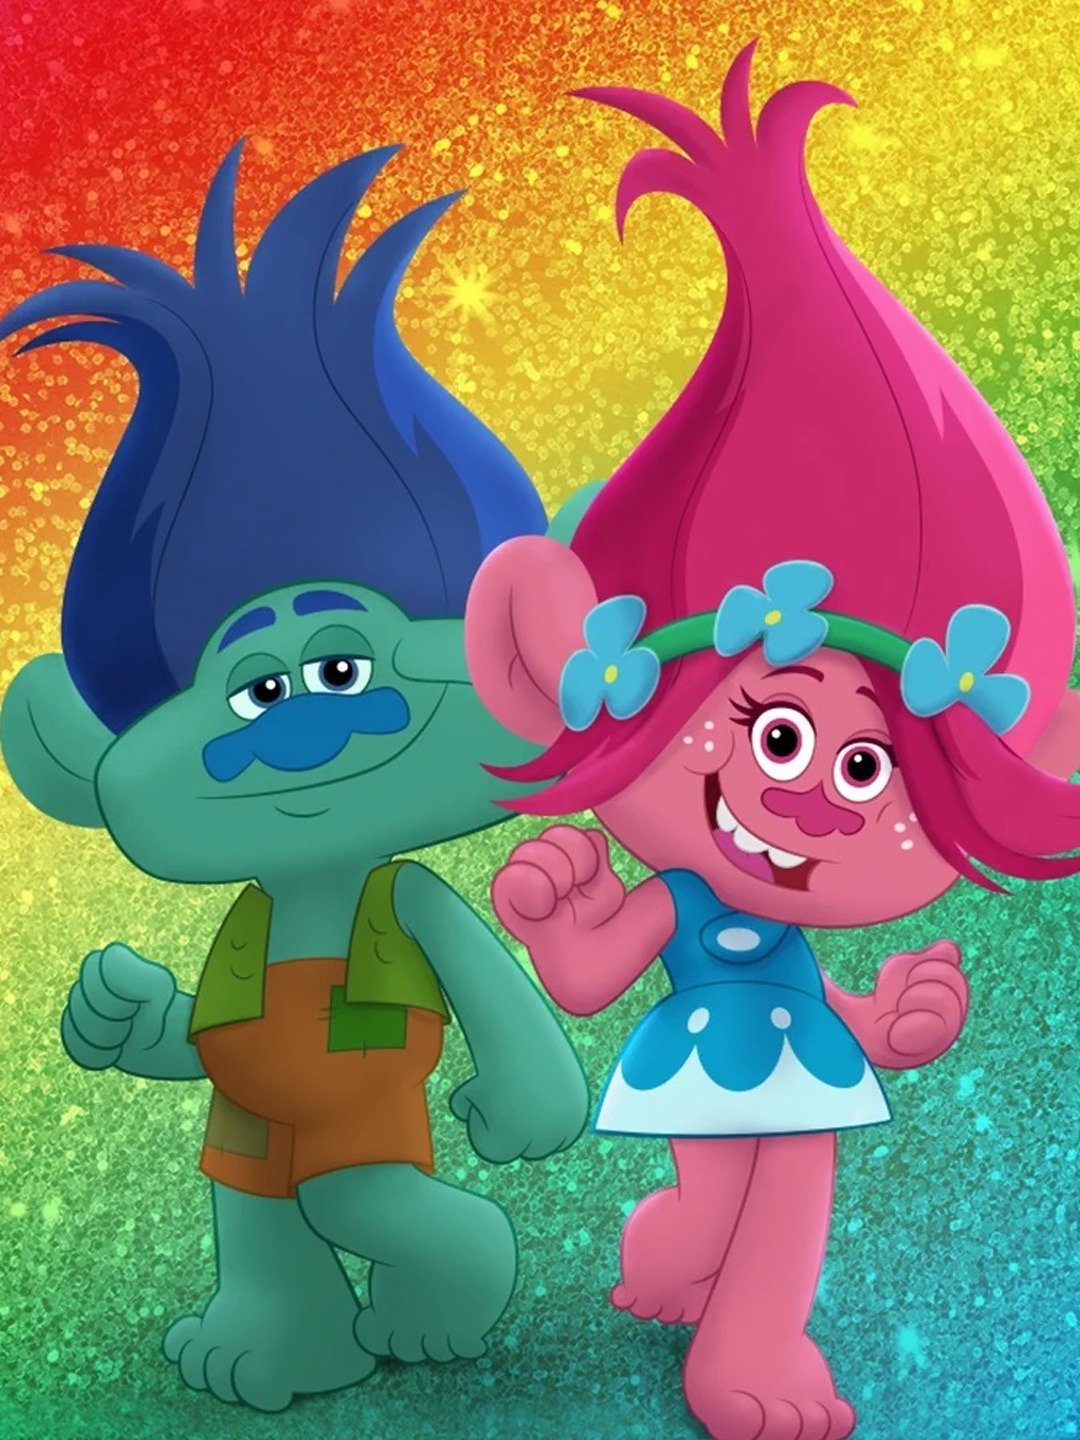 Trolls: The Beat Goes On! - Trailers & Videos - Rotten Tomatoes